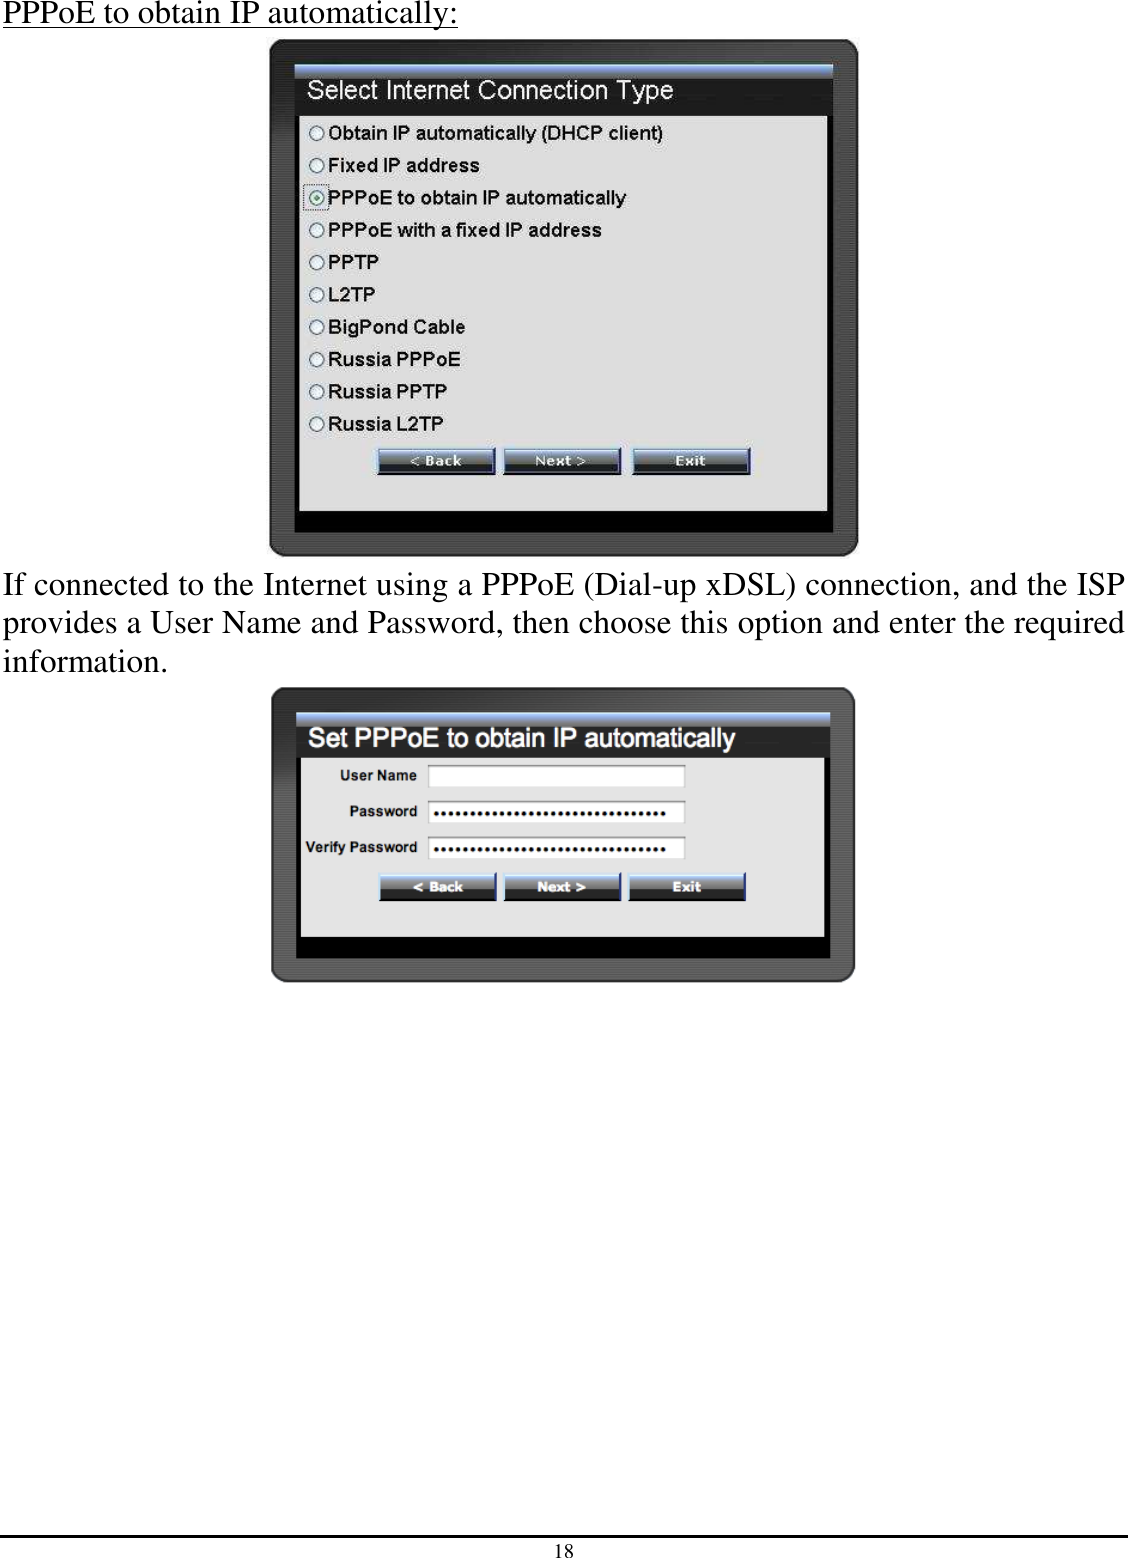 18 PPPoE to obtain IP automatically:  If connected to the Internet using a PPPoE (Dial-up xDSL) connection, and the ISP provides a User Name and Password, then choose this option and enter the required information.  